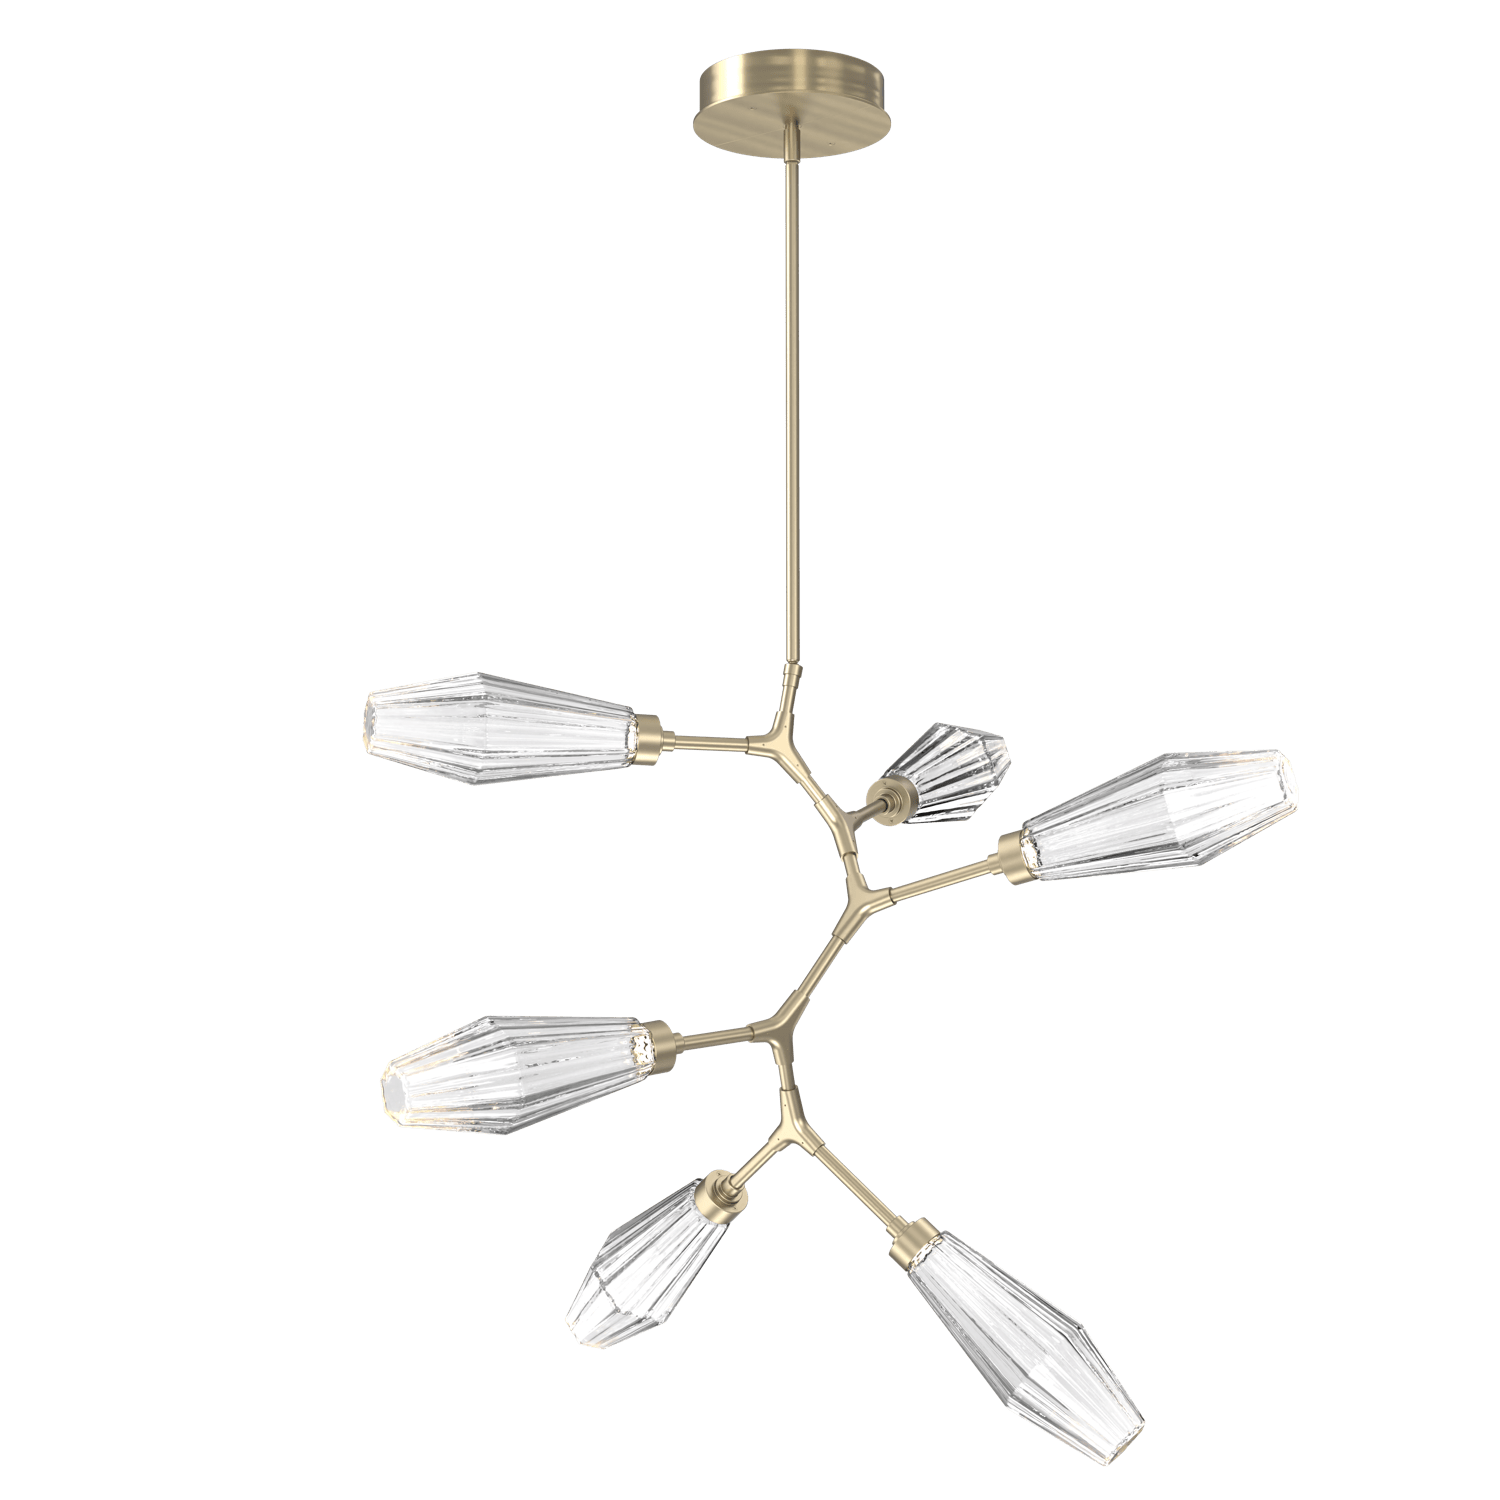 CHB0049-VA-HB-RC-Hammerton-Studio-Aalto-6-light-modern-vine-chandelier-with-heritage-brass-finish-and-optic-ribbed-clear-glass-shades-and-LED-lamping